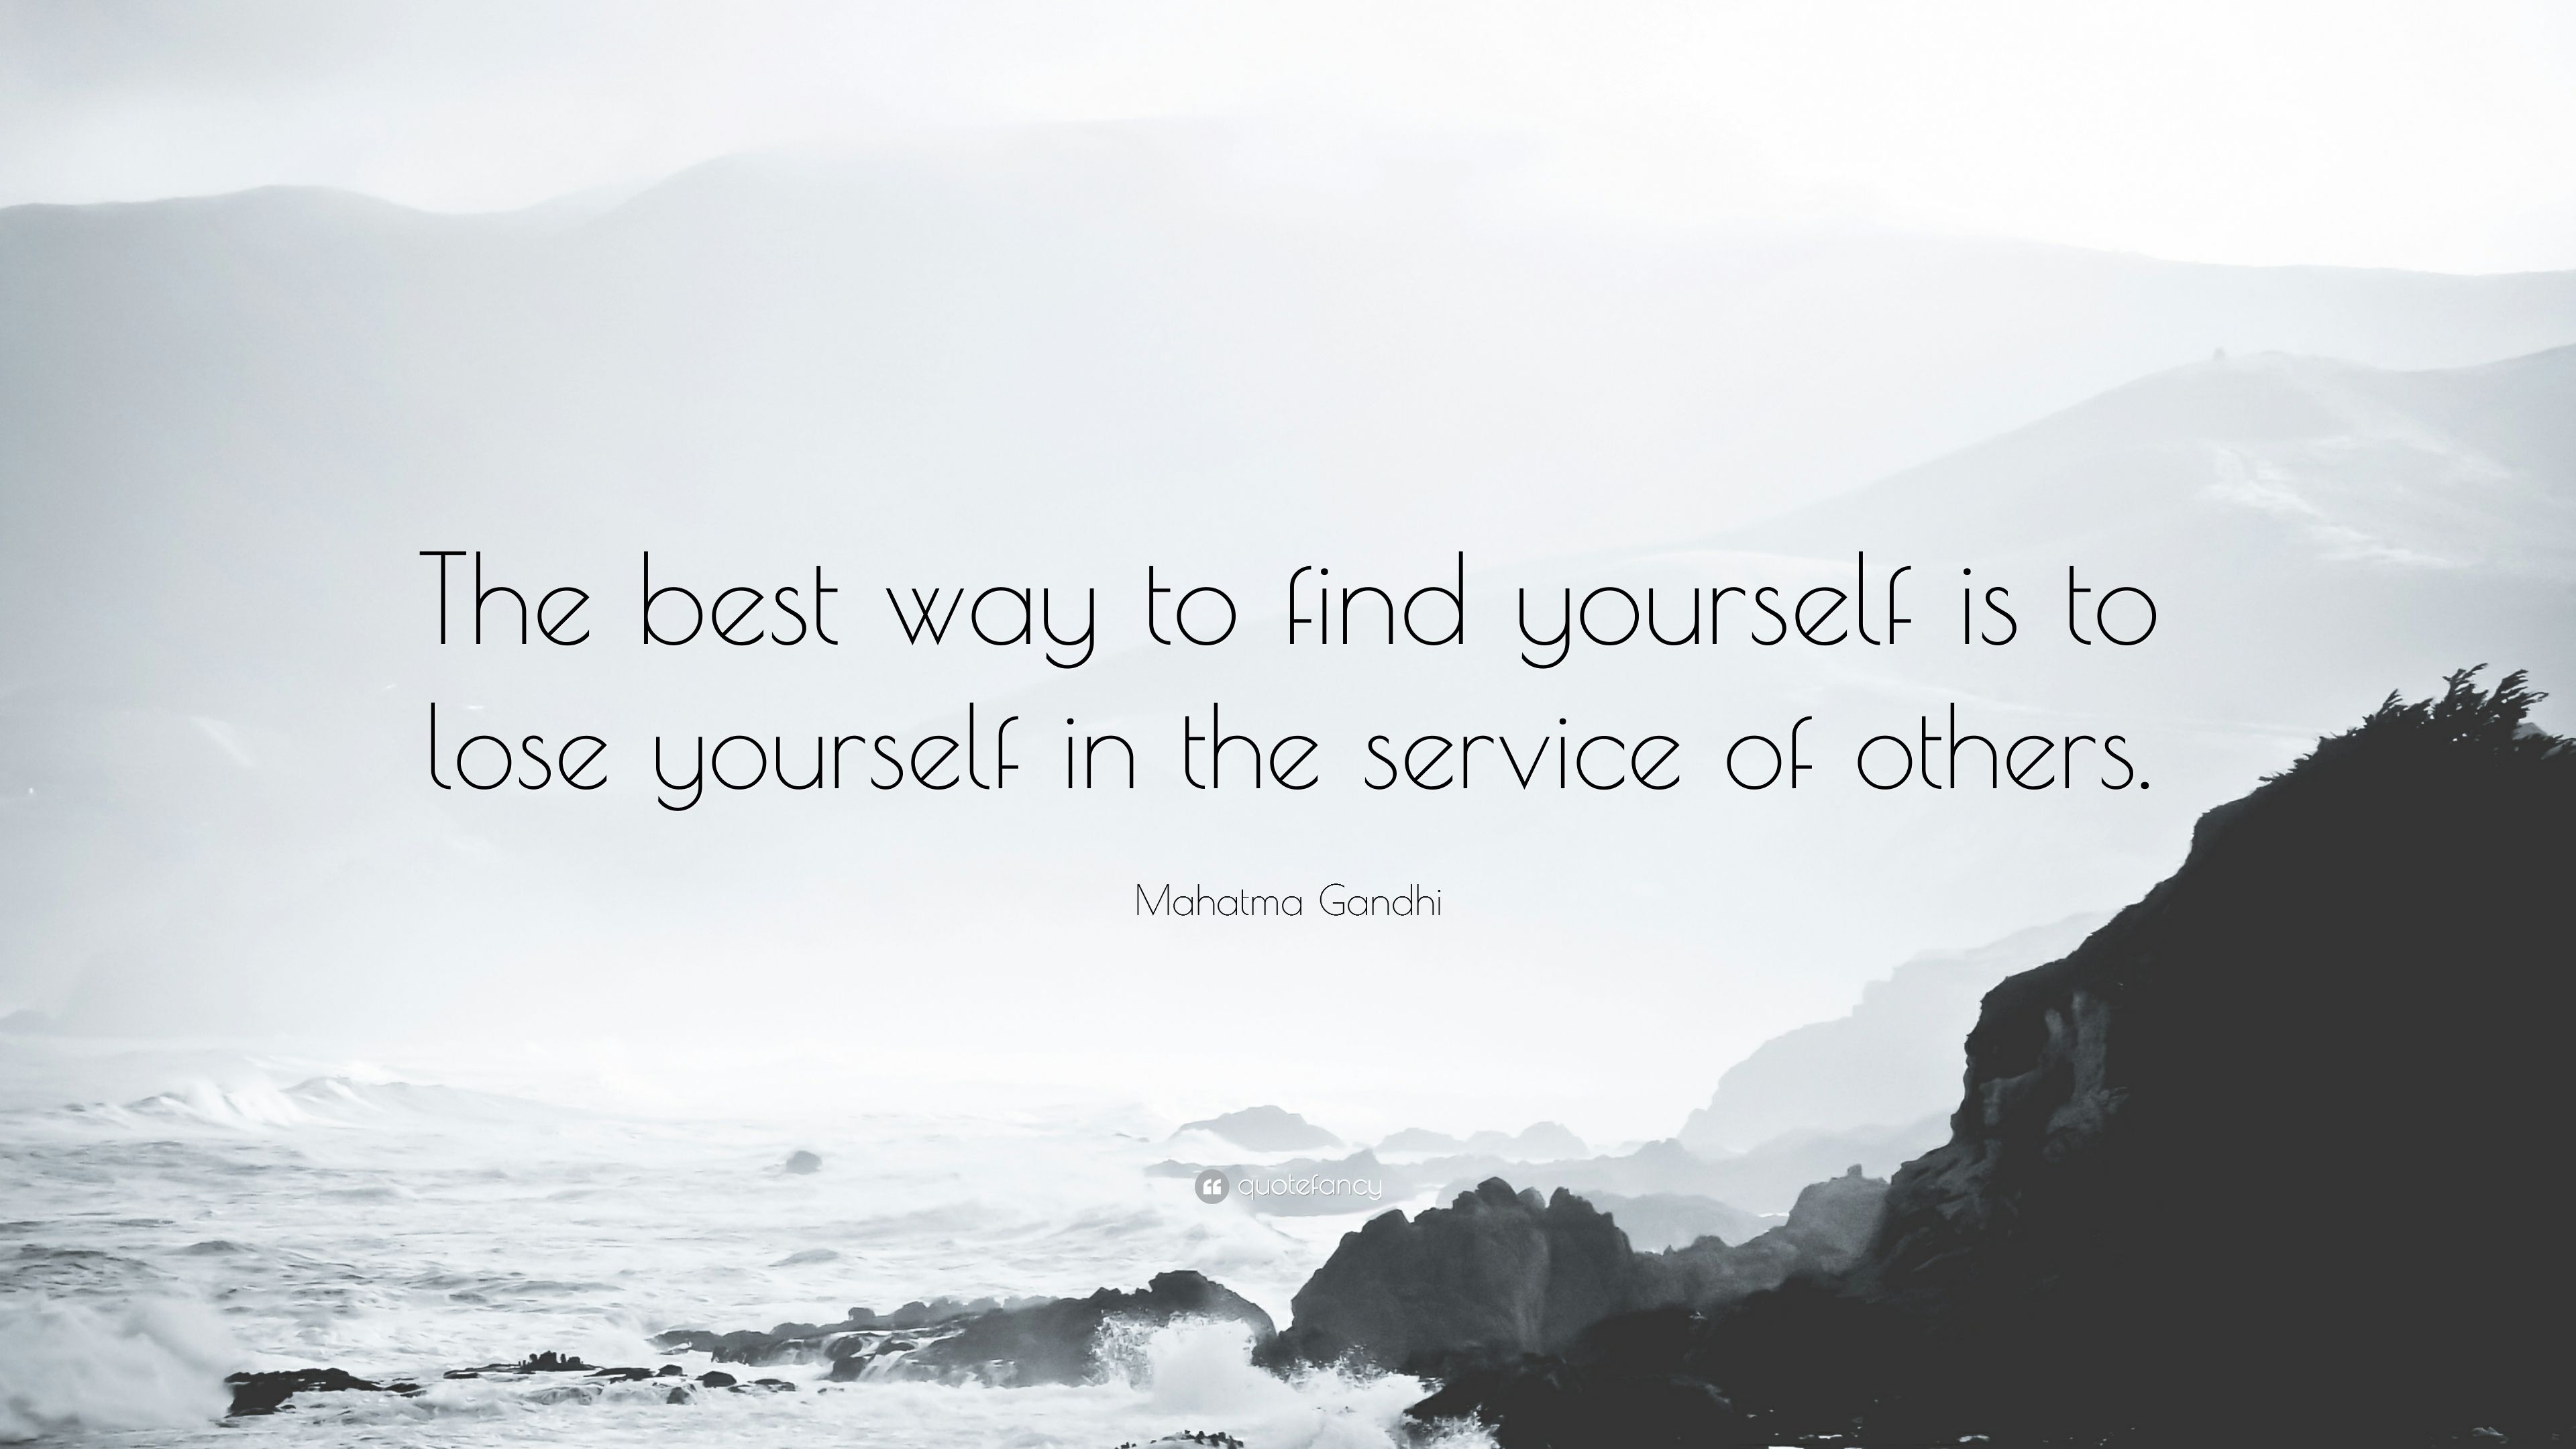 Mahatma Gandhi Quote: “The best way to find yourself is to lose